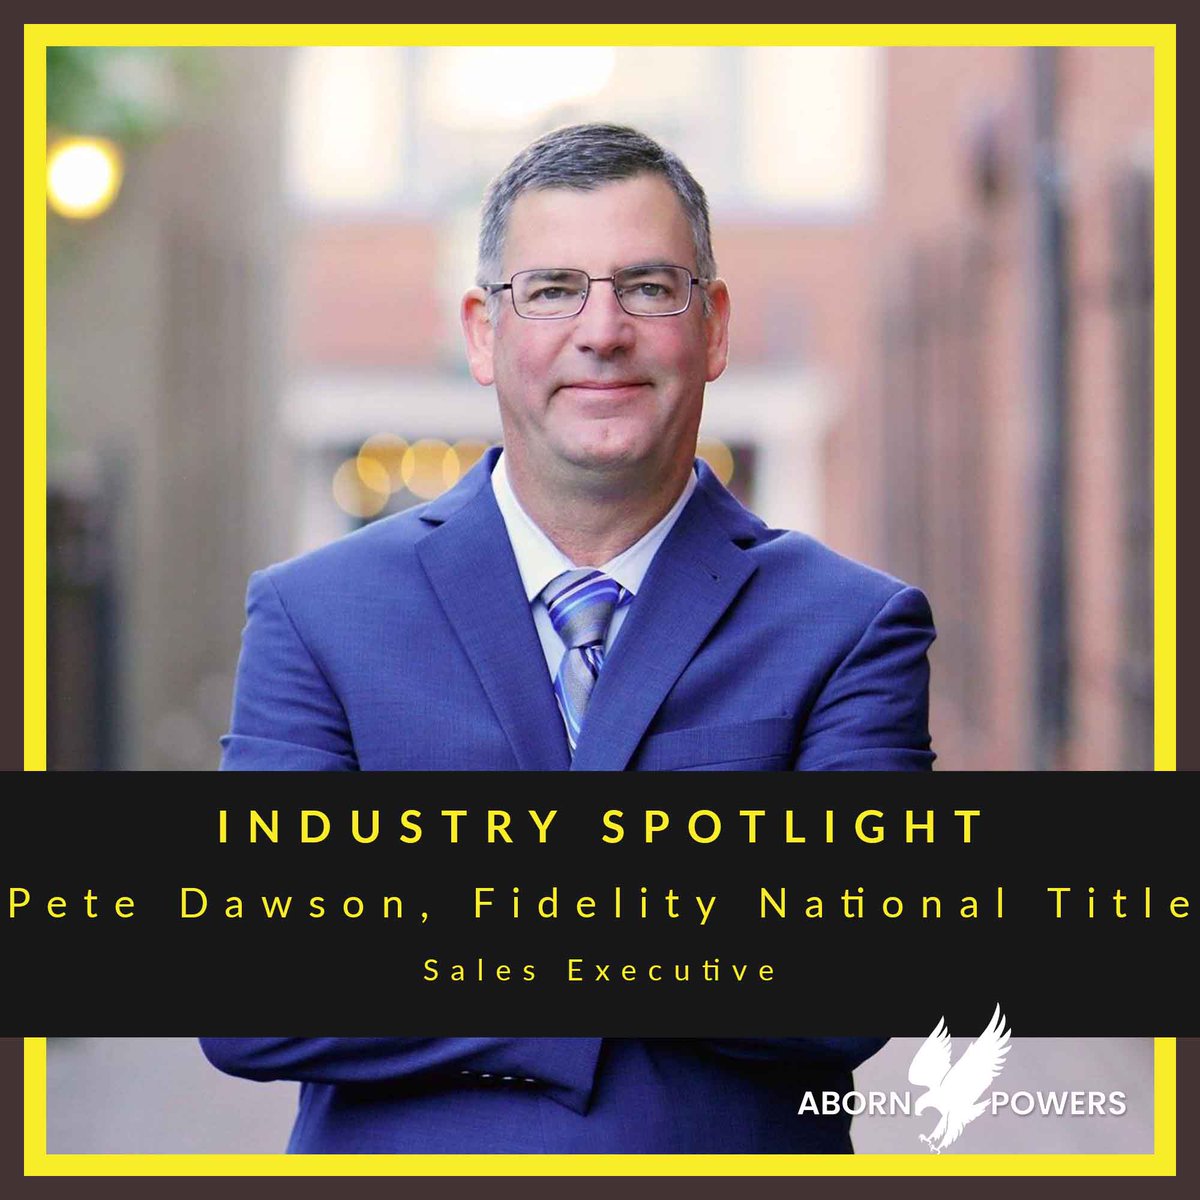 We want to spotlight another industry rockstar! When you are in need of a title company, turn to Pete Dawson at Fidelity National Title. #realestate #fidelitynationaltitle #petedawson #titlecompany #placerville #hangtown #abornpowers